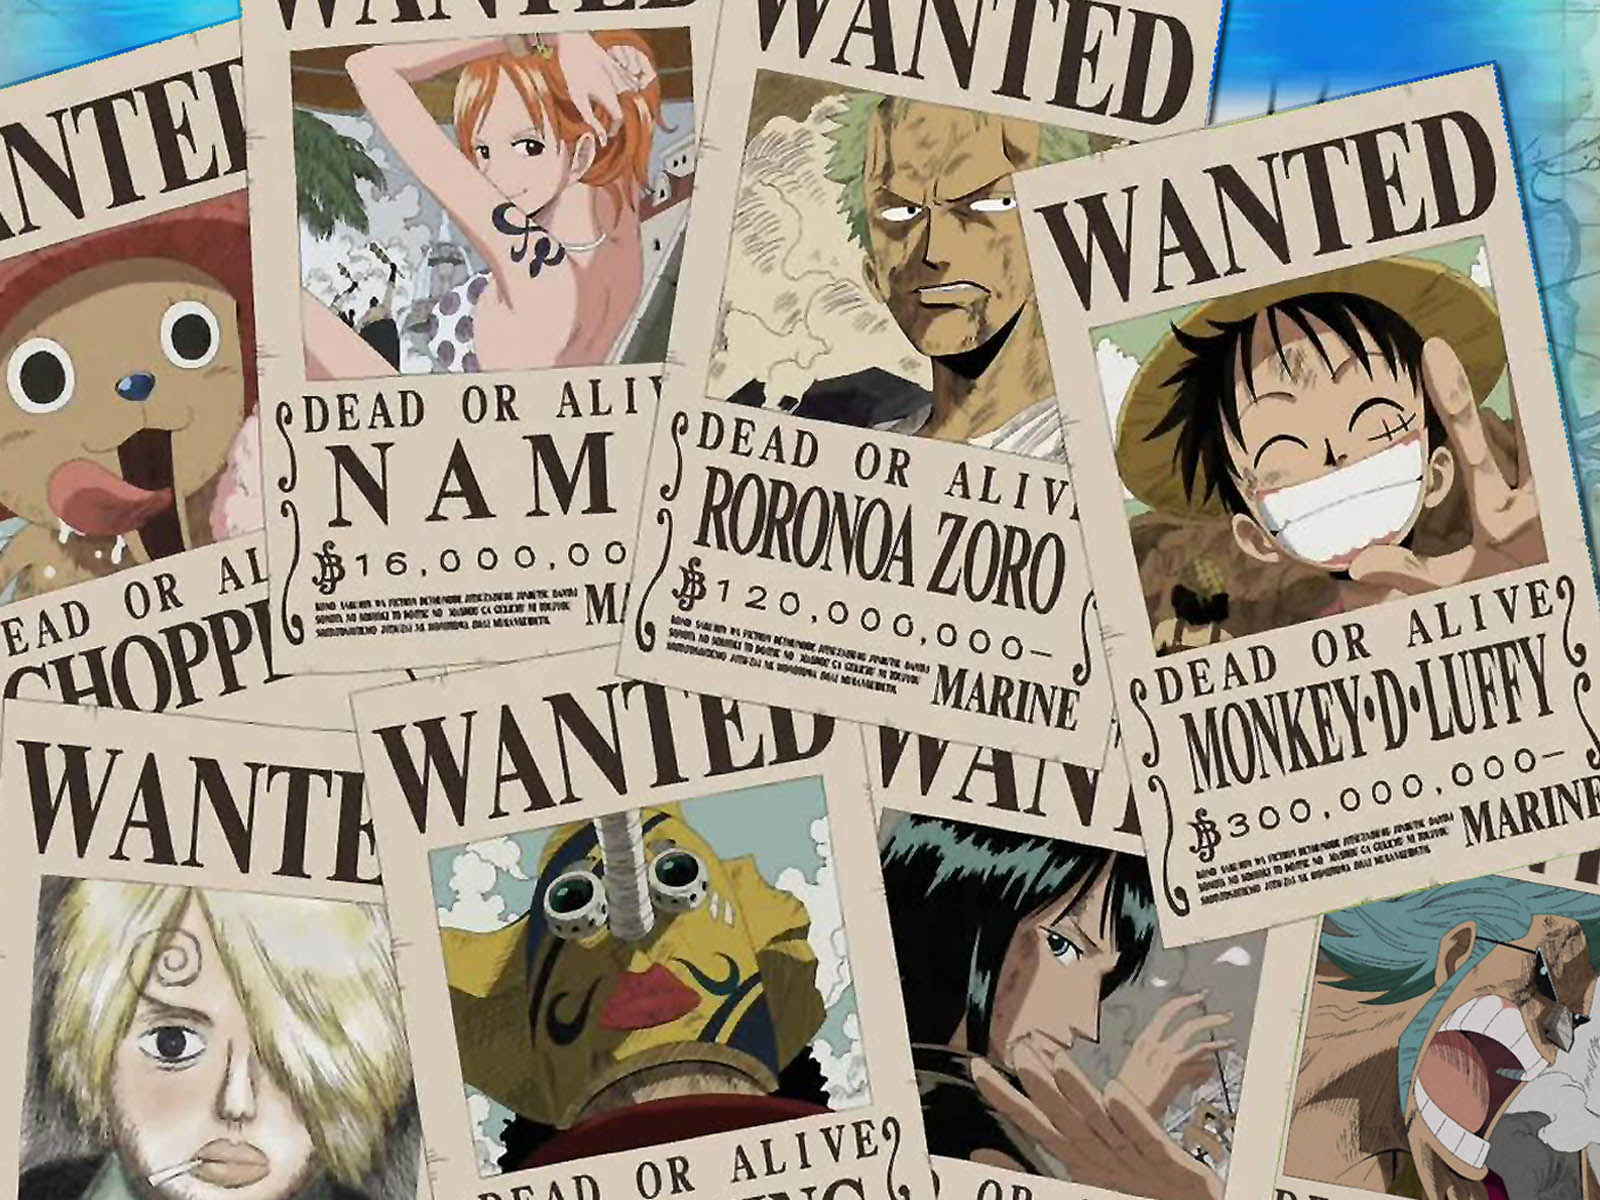 Wanted poster of the straw hats